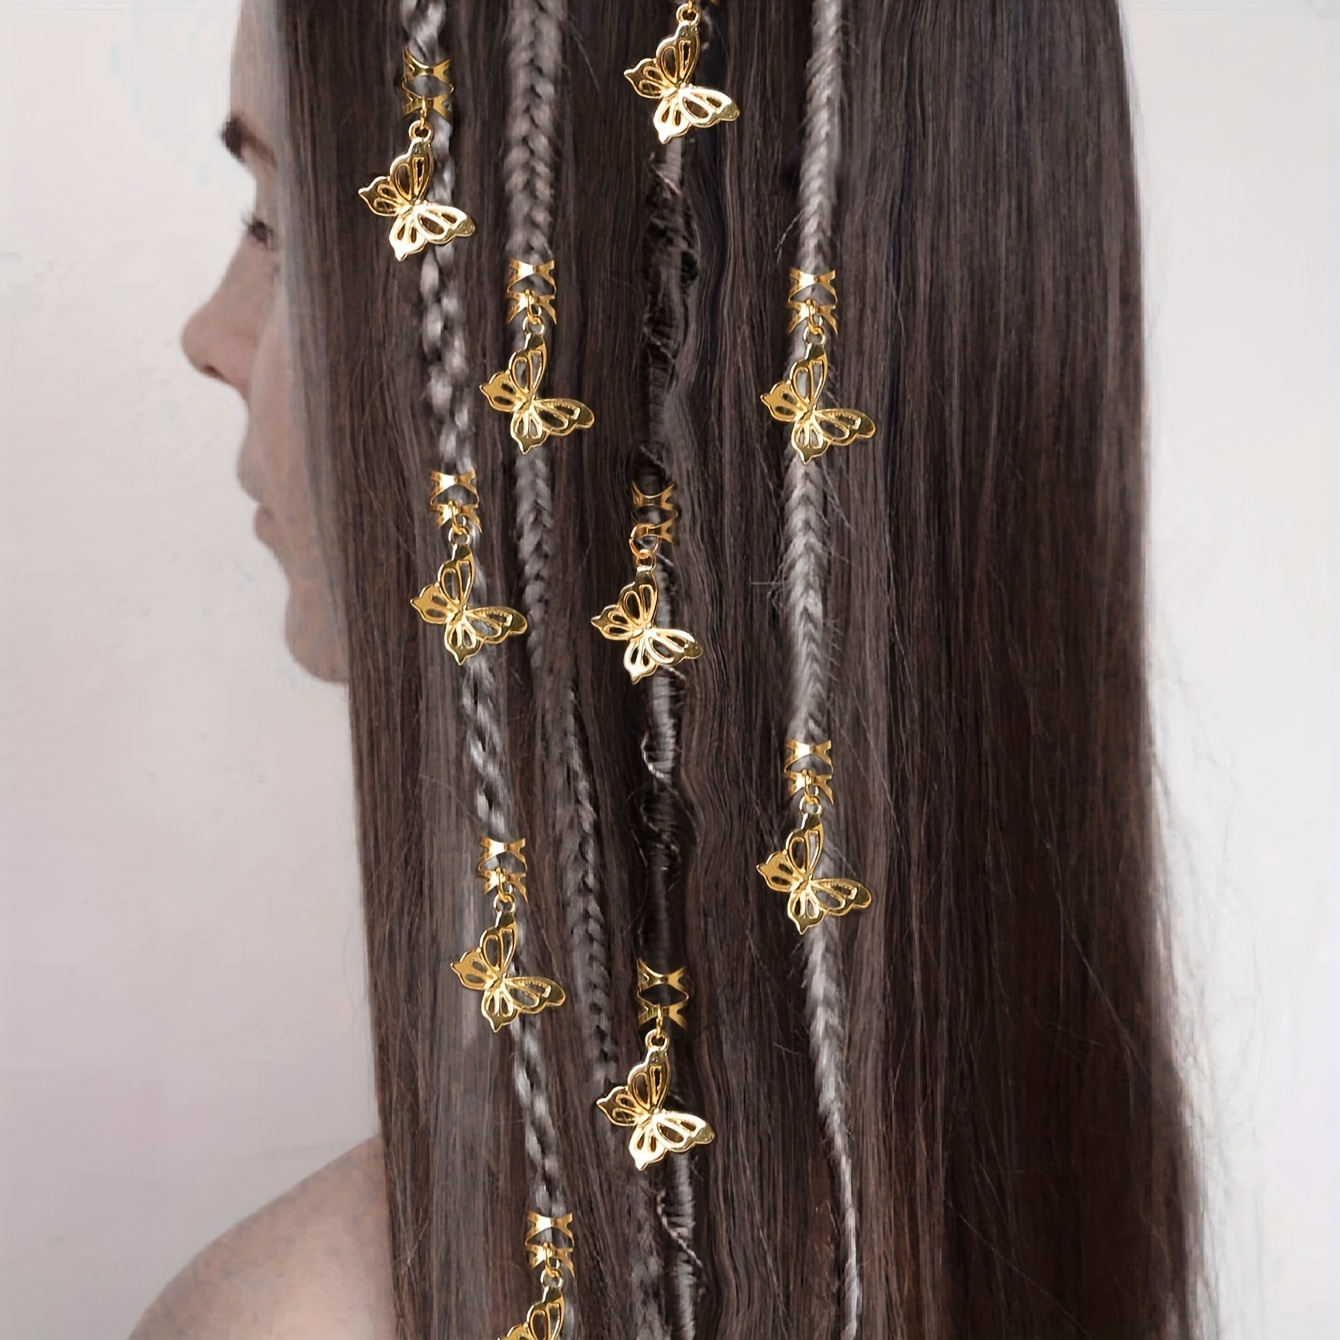  259PCS Hair Jewelry Accessories for Women Braids